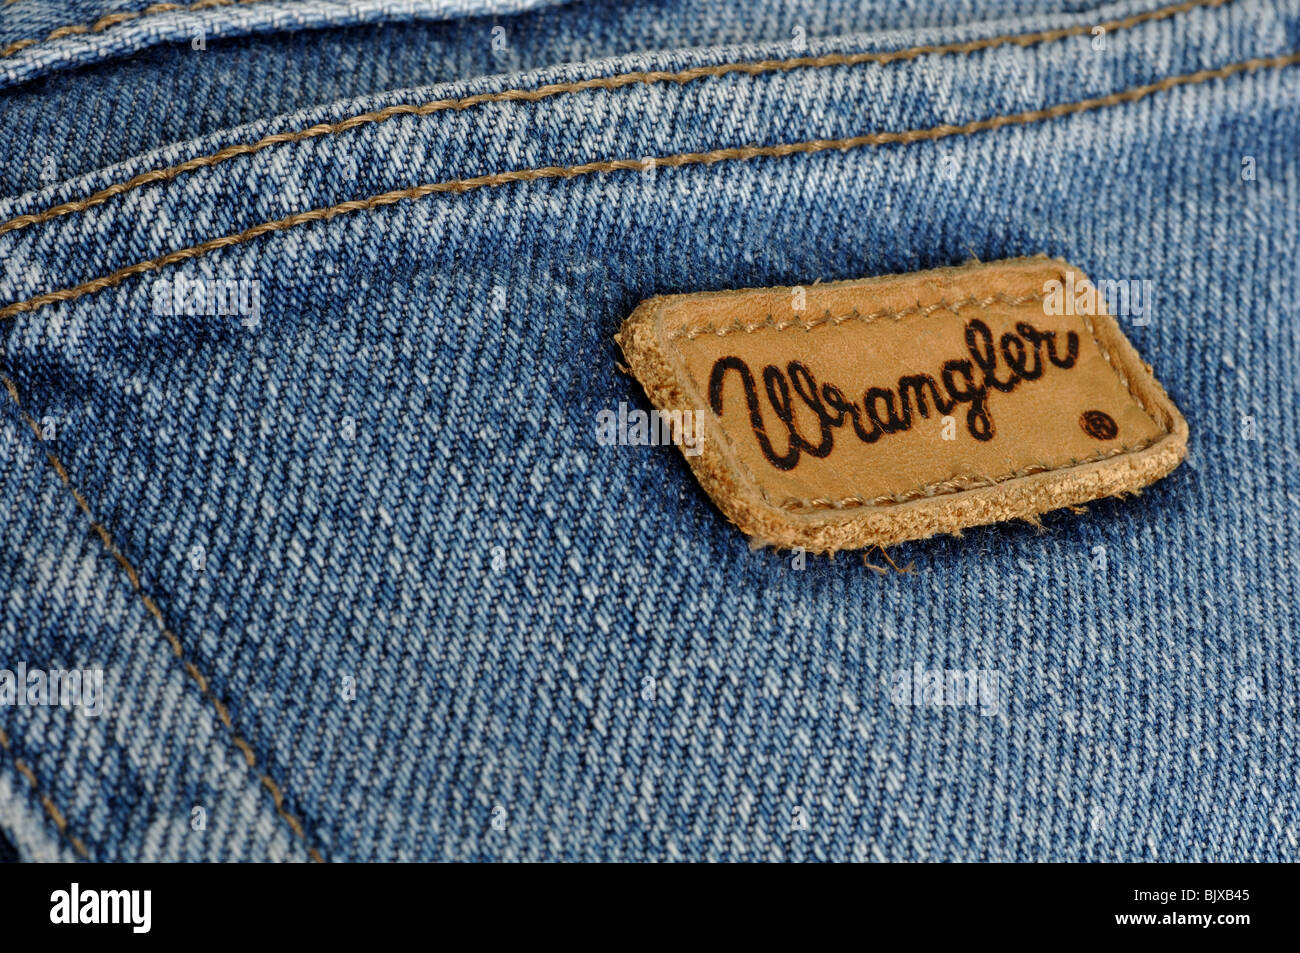 Wrangler Jeans High Resolution Stock Photography and Images - Alamy